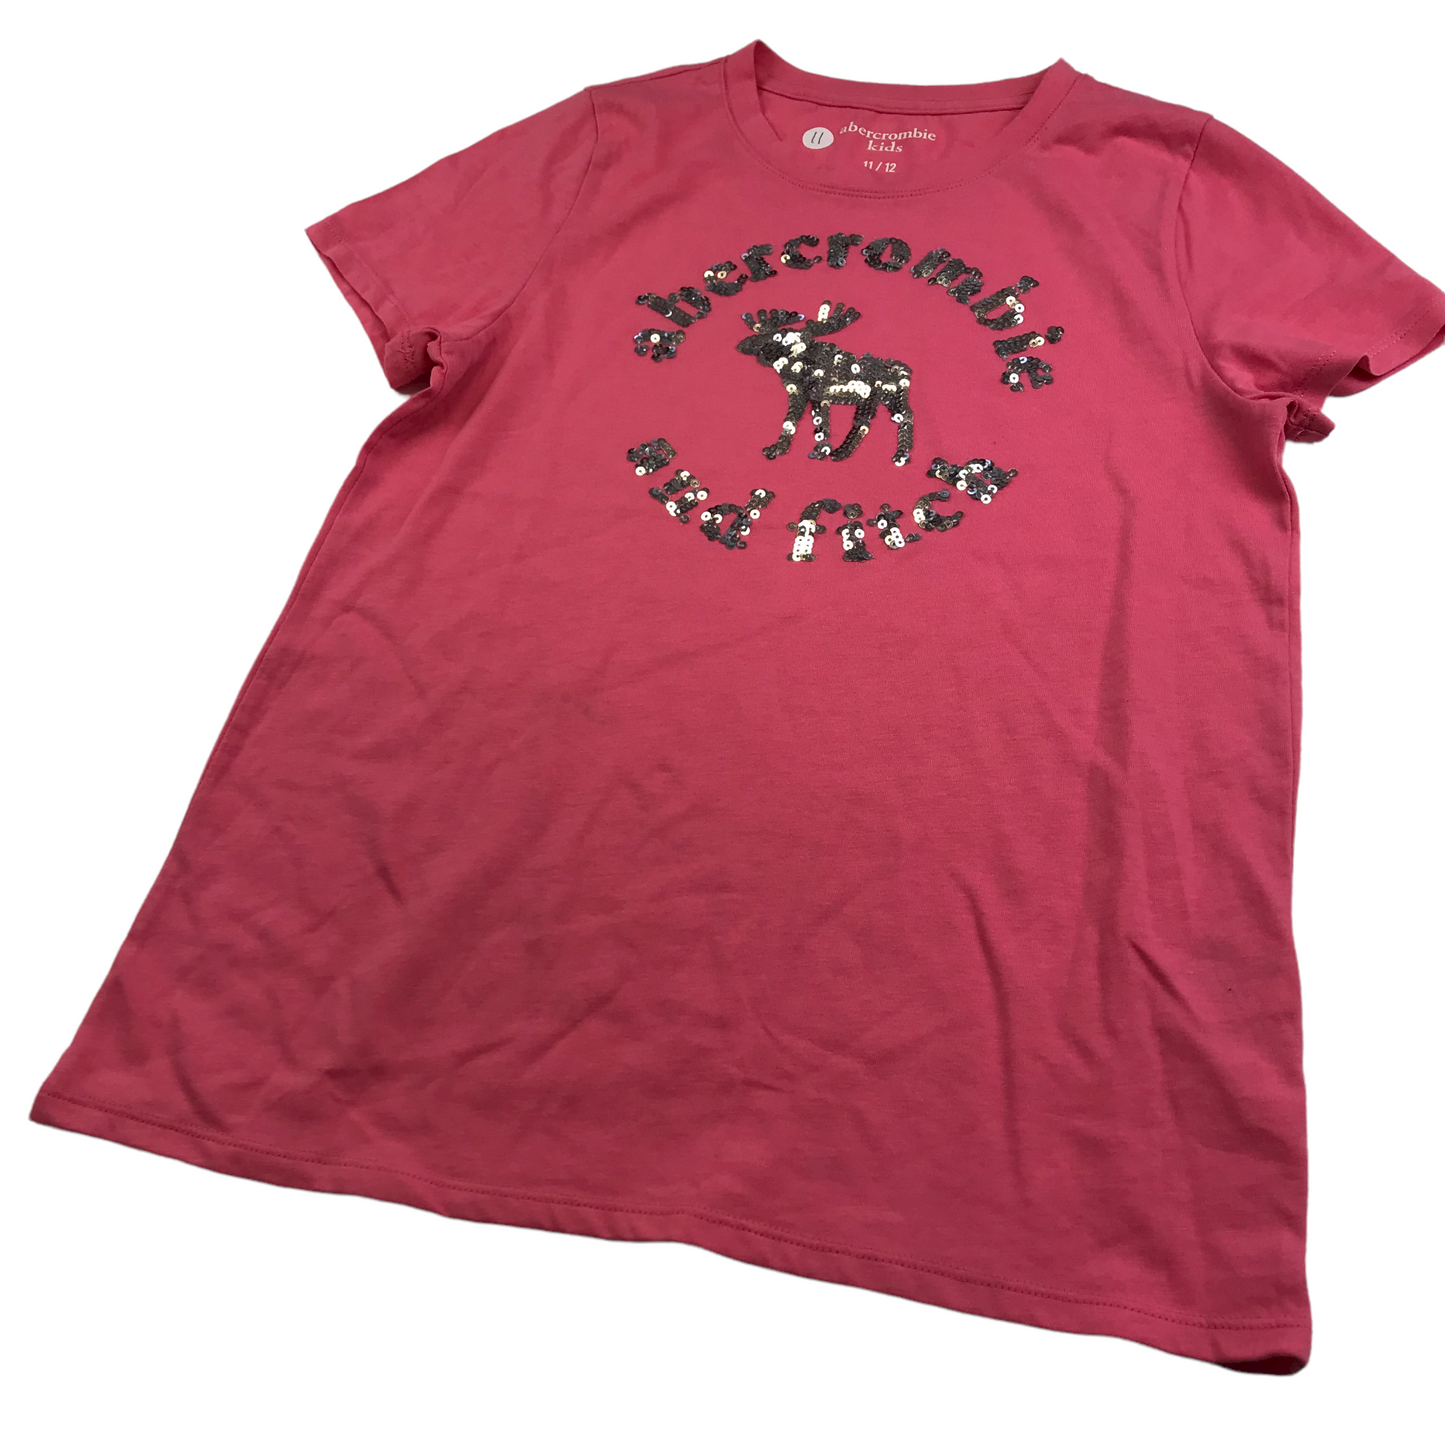 Abercrombie Pink Sequin T-shirt Age 11